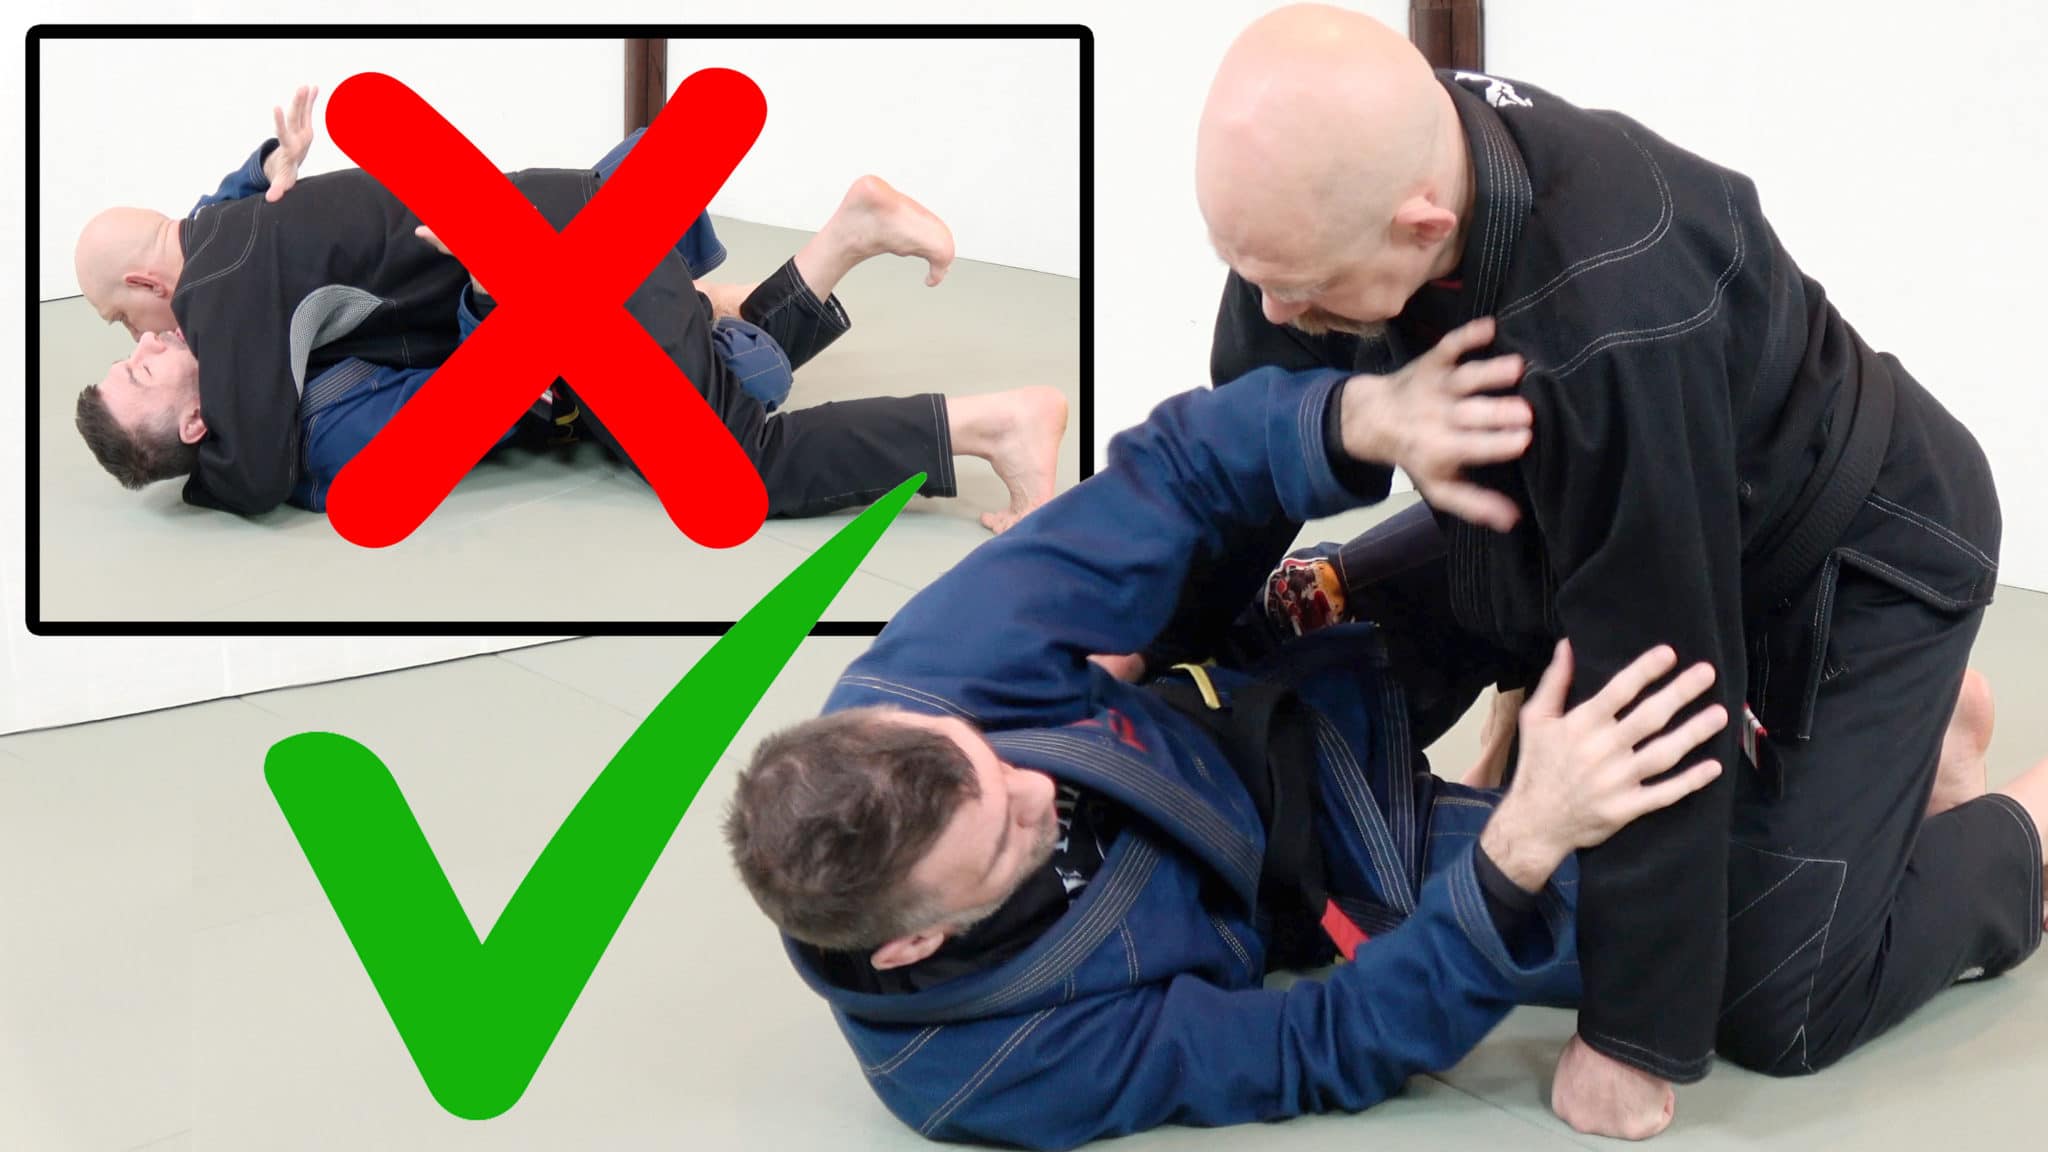 How to defend the cross face from the bottom of half guard